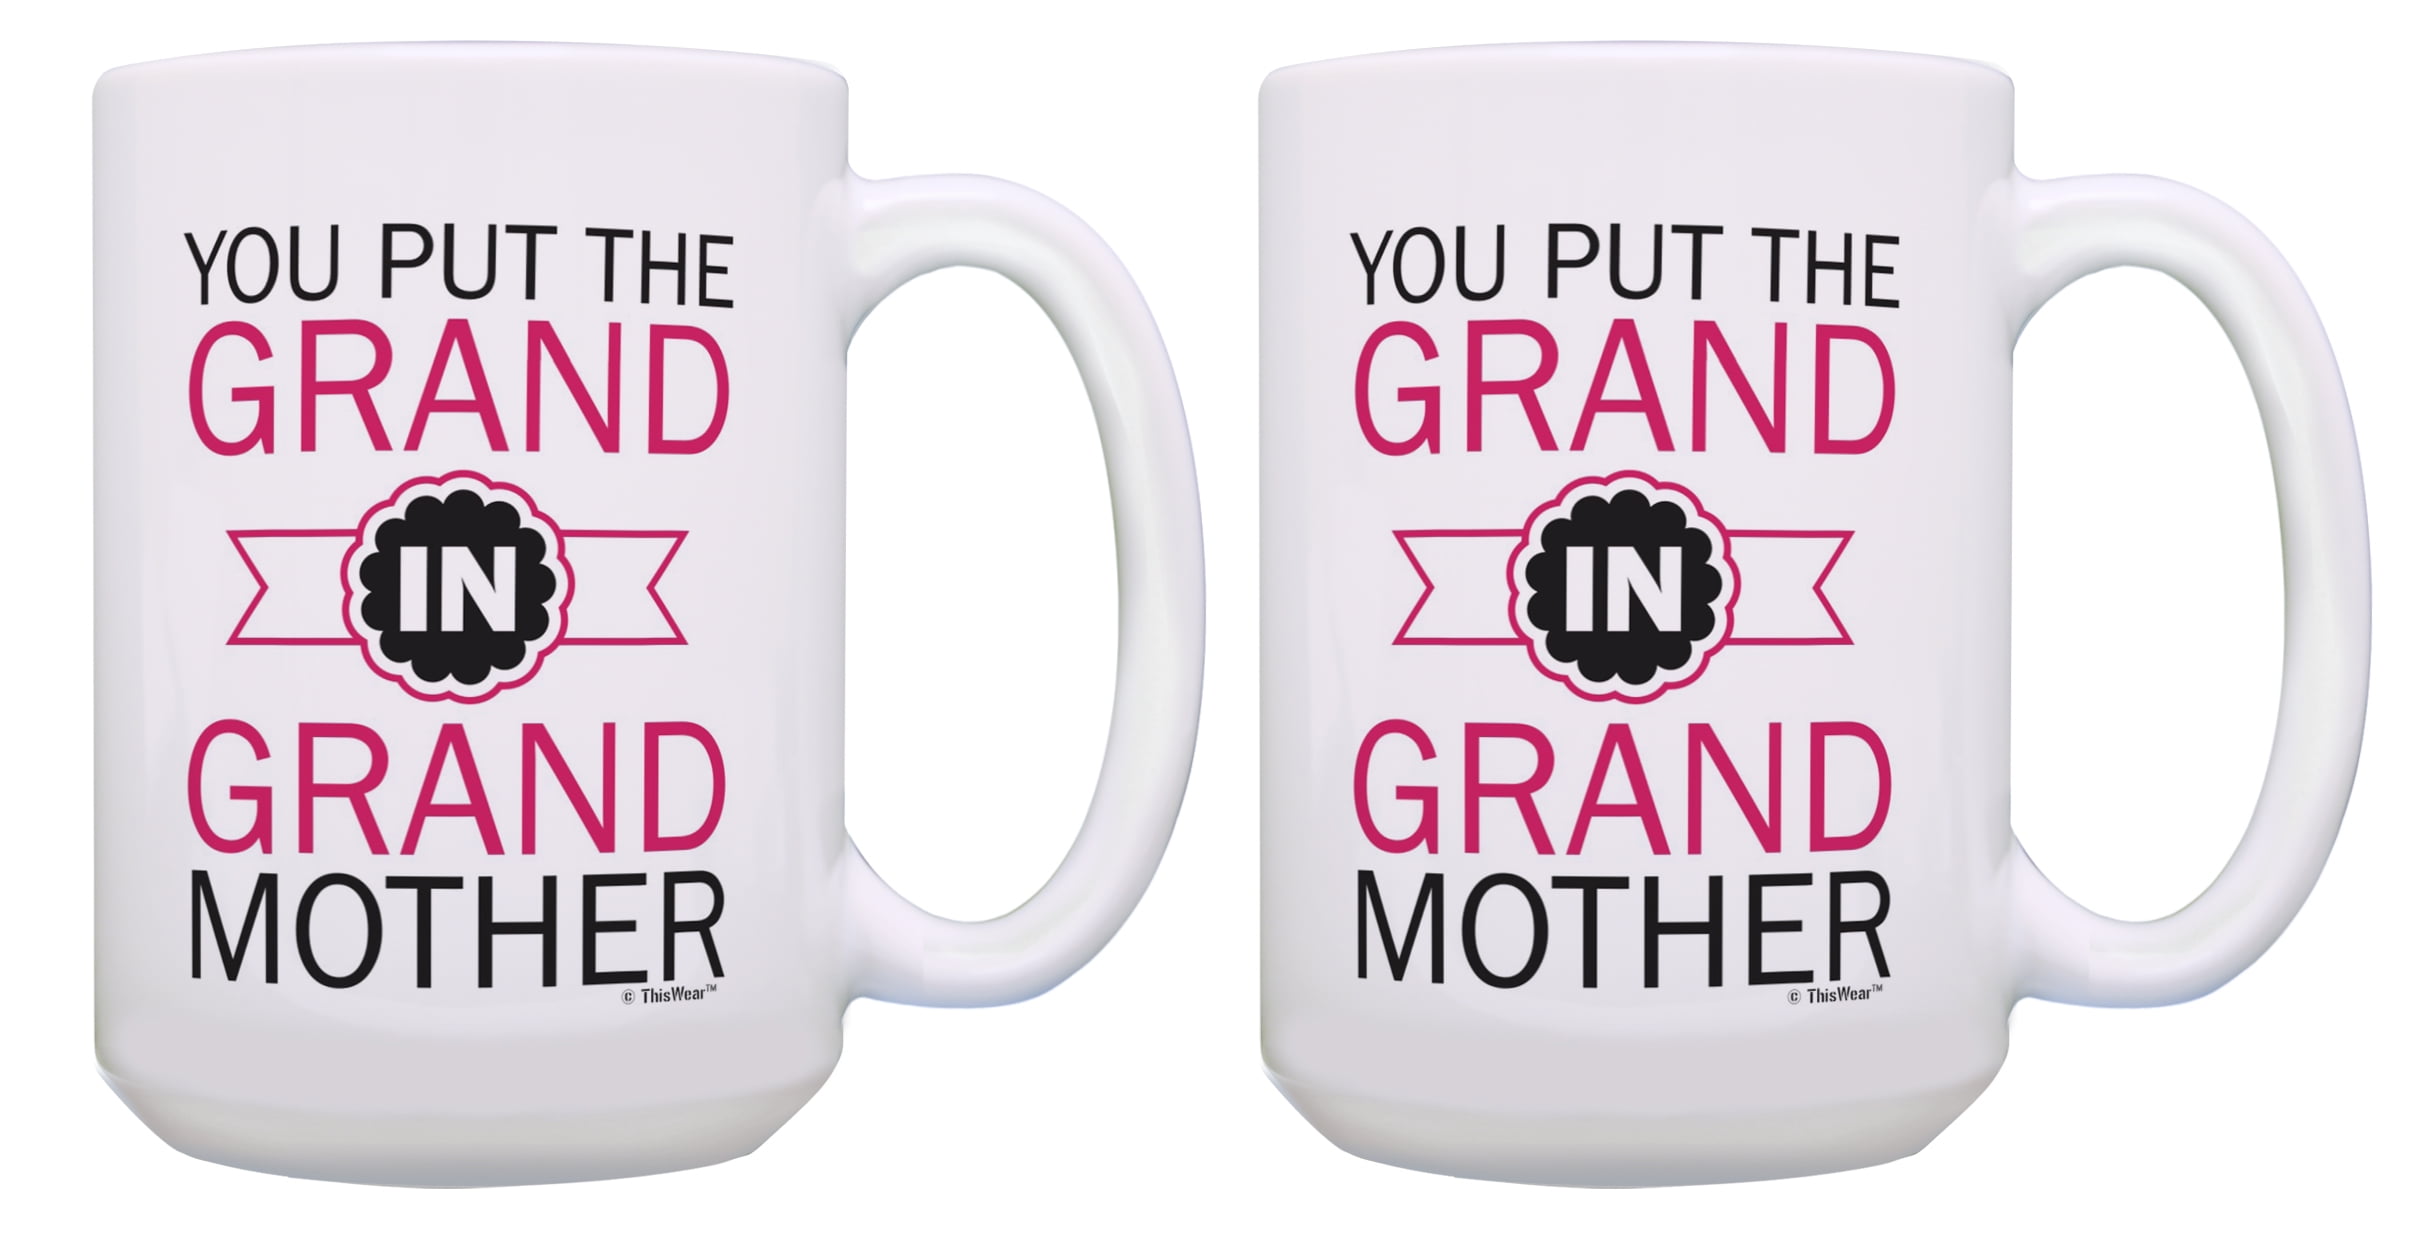 11 Oz This Might be Wine Grandma Coffee Mug You Put the Great in Great Grandma Best Mothers Day and Birthday Gifts for Your Grandma Grandmother Ceramic Cup White 